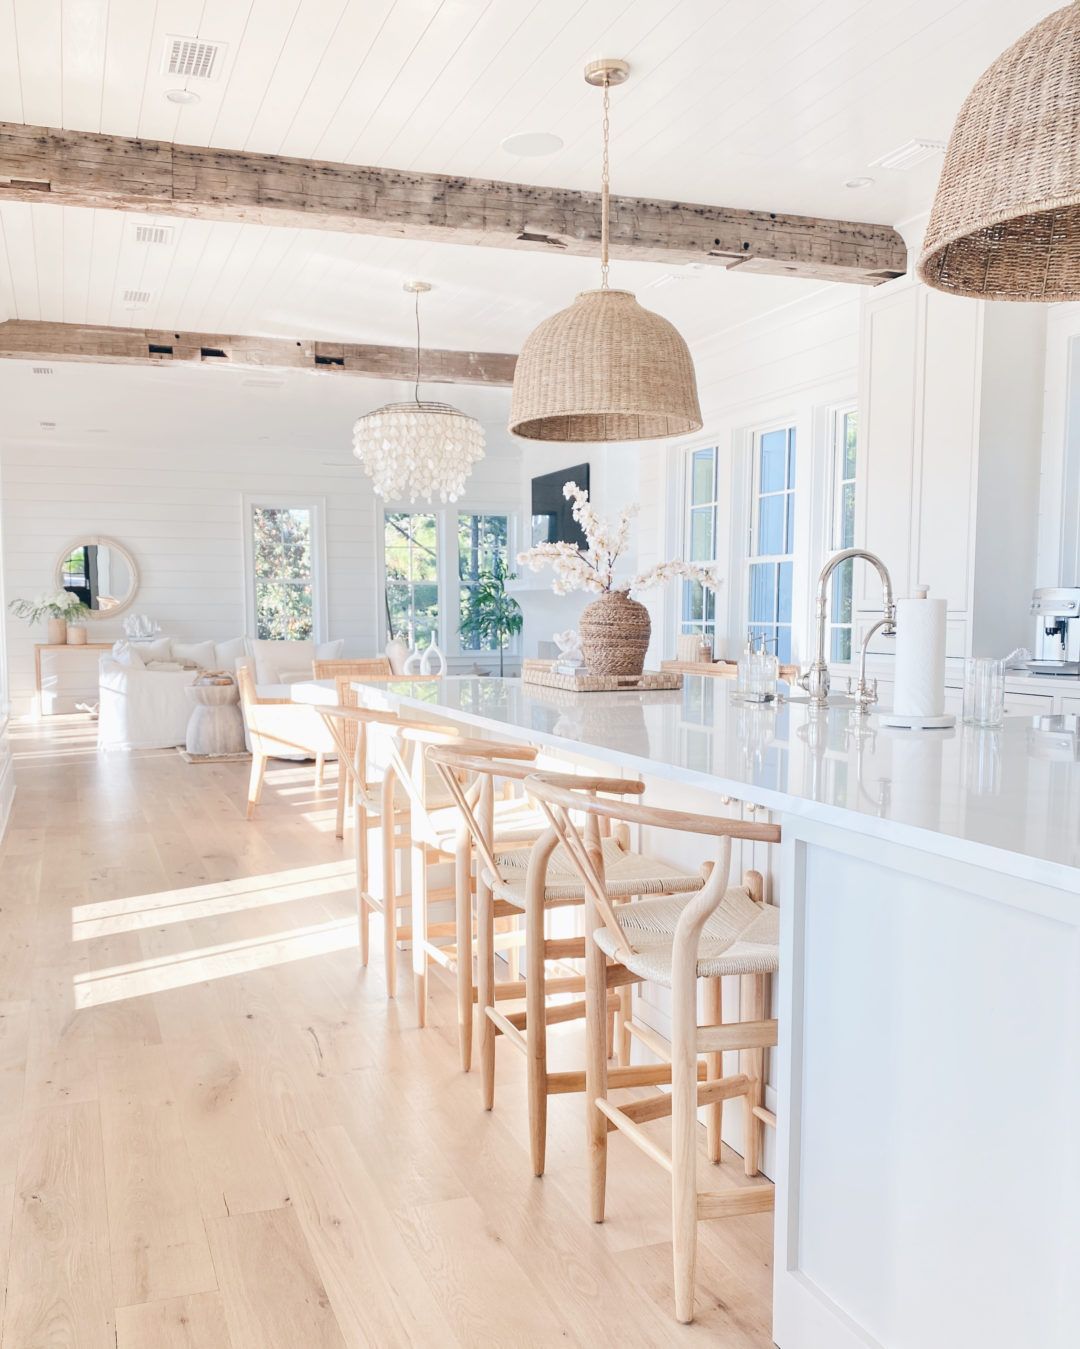 Coastal Charm: Stunning Kitchen Ideas for a Beach-Inspired Space